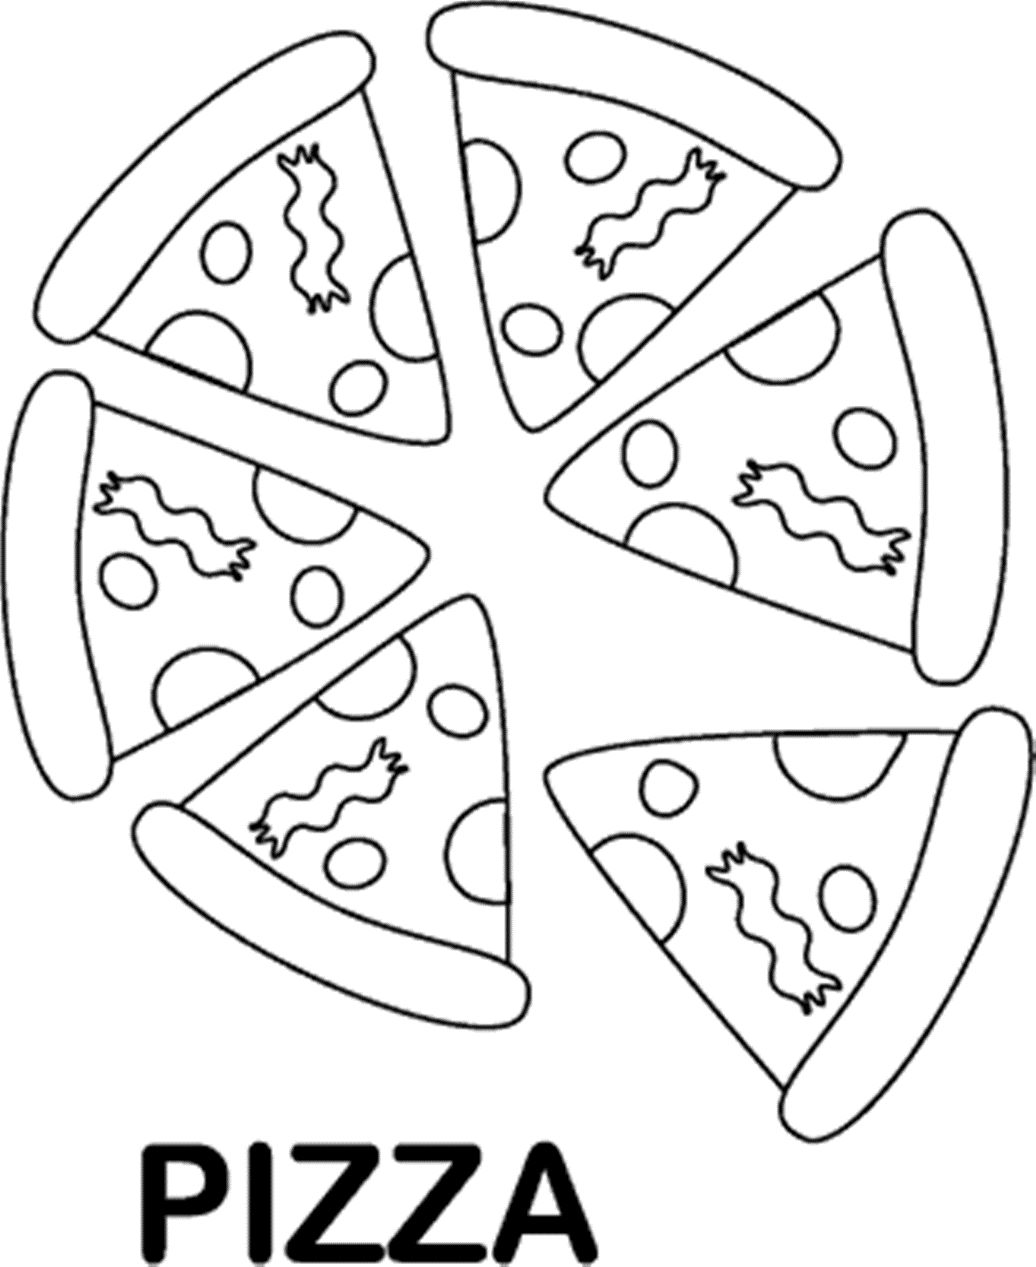 Food Pyramid Coloring Pages For Preschool Food Coloring Pages Free ...